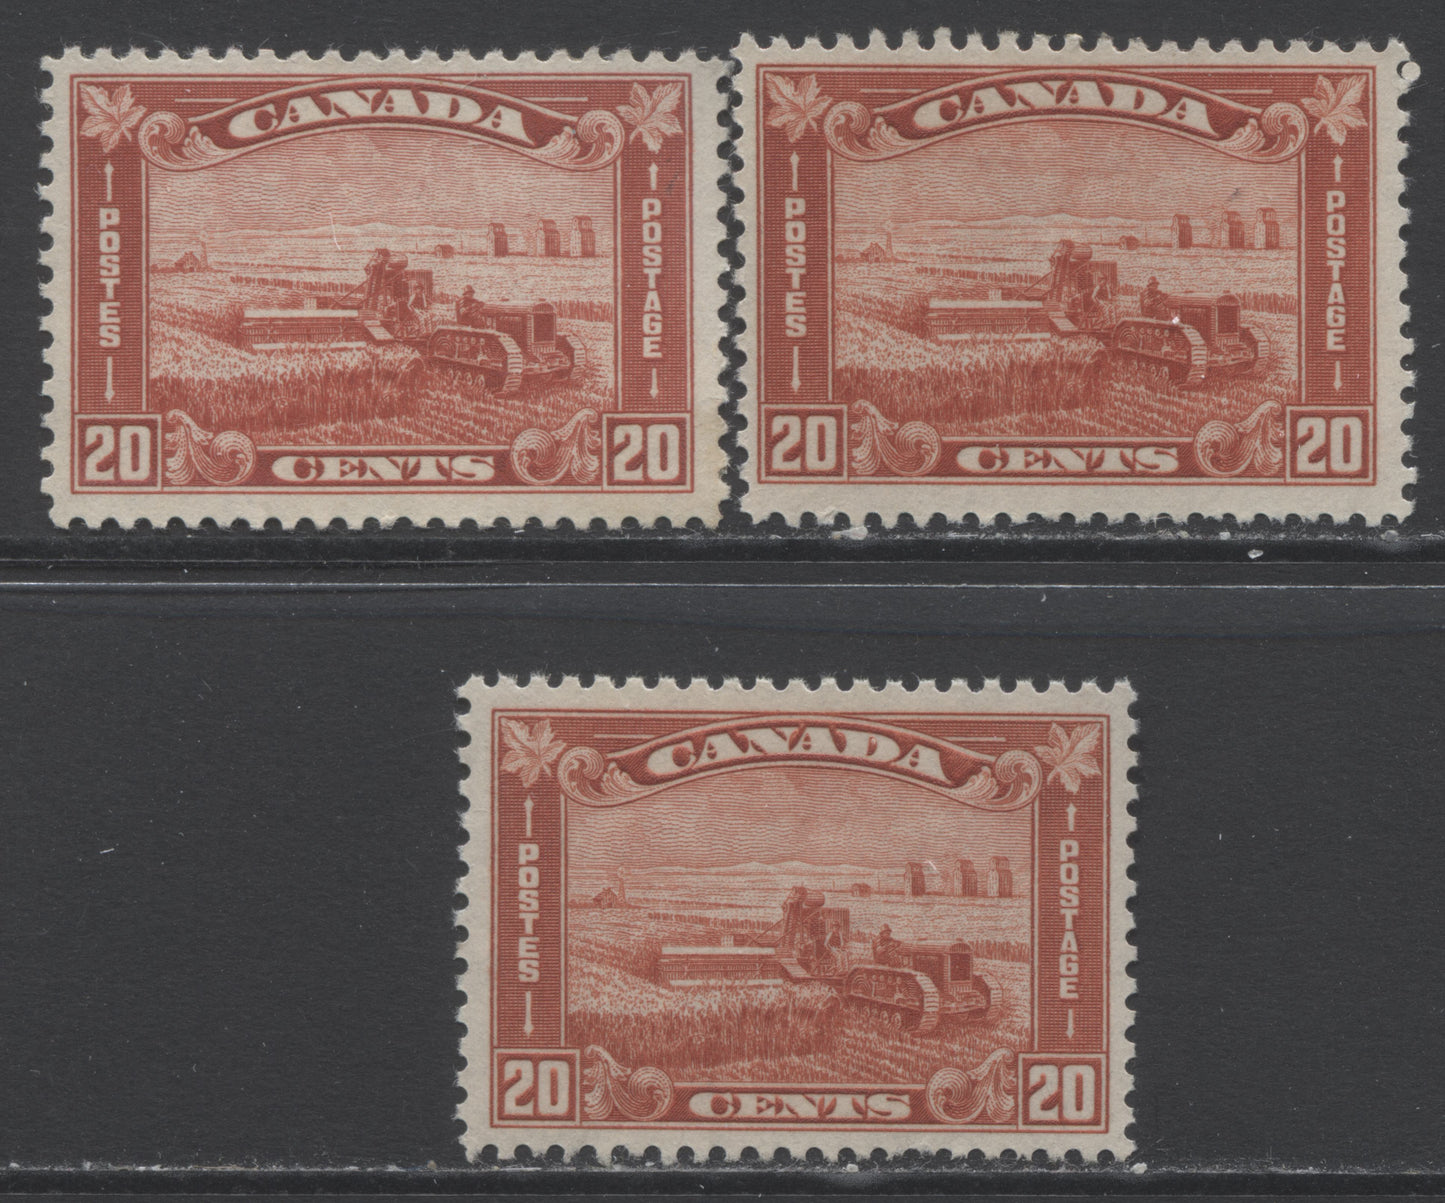 Lot 228 Canada #175 20c Brown Red Harvesting Wheat, 1930-1931 Arch/Leaf Issue, 3 FOG Singles Showing 3 Different Shades & 2 Gum Combinations